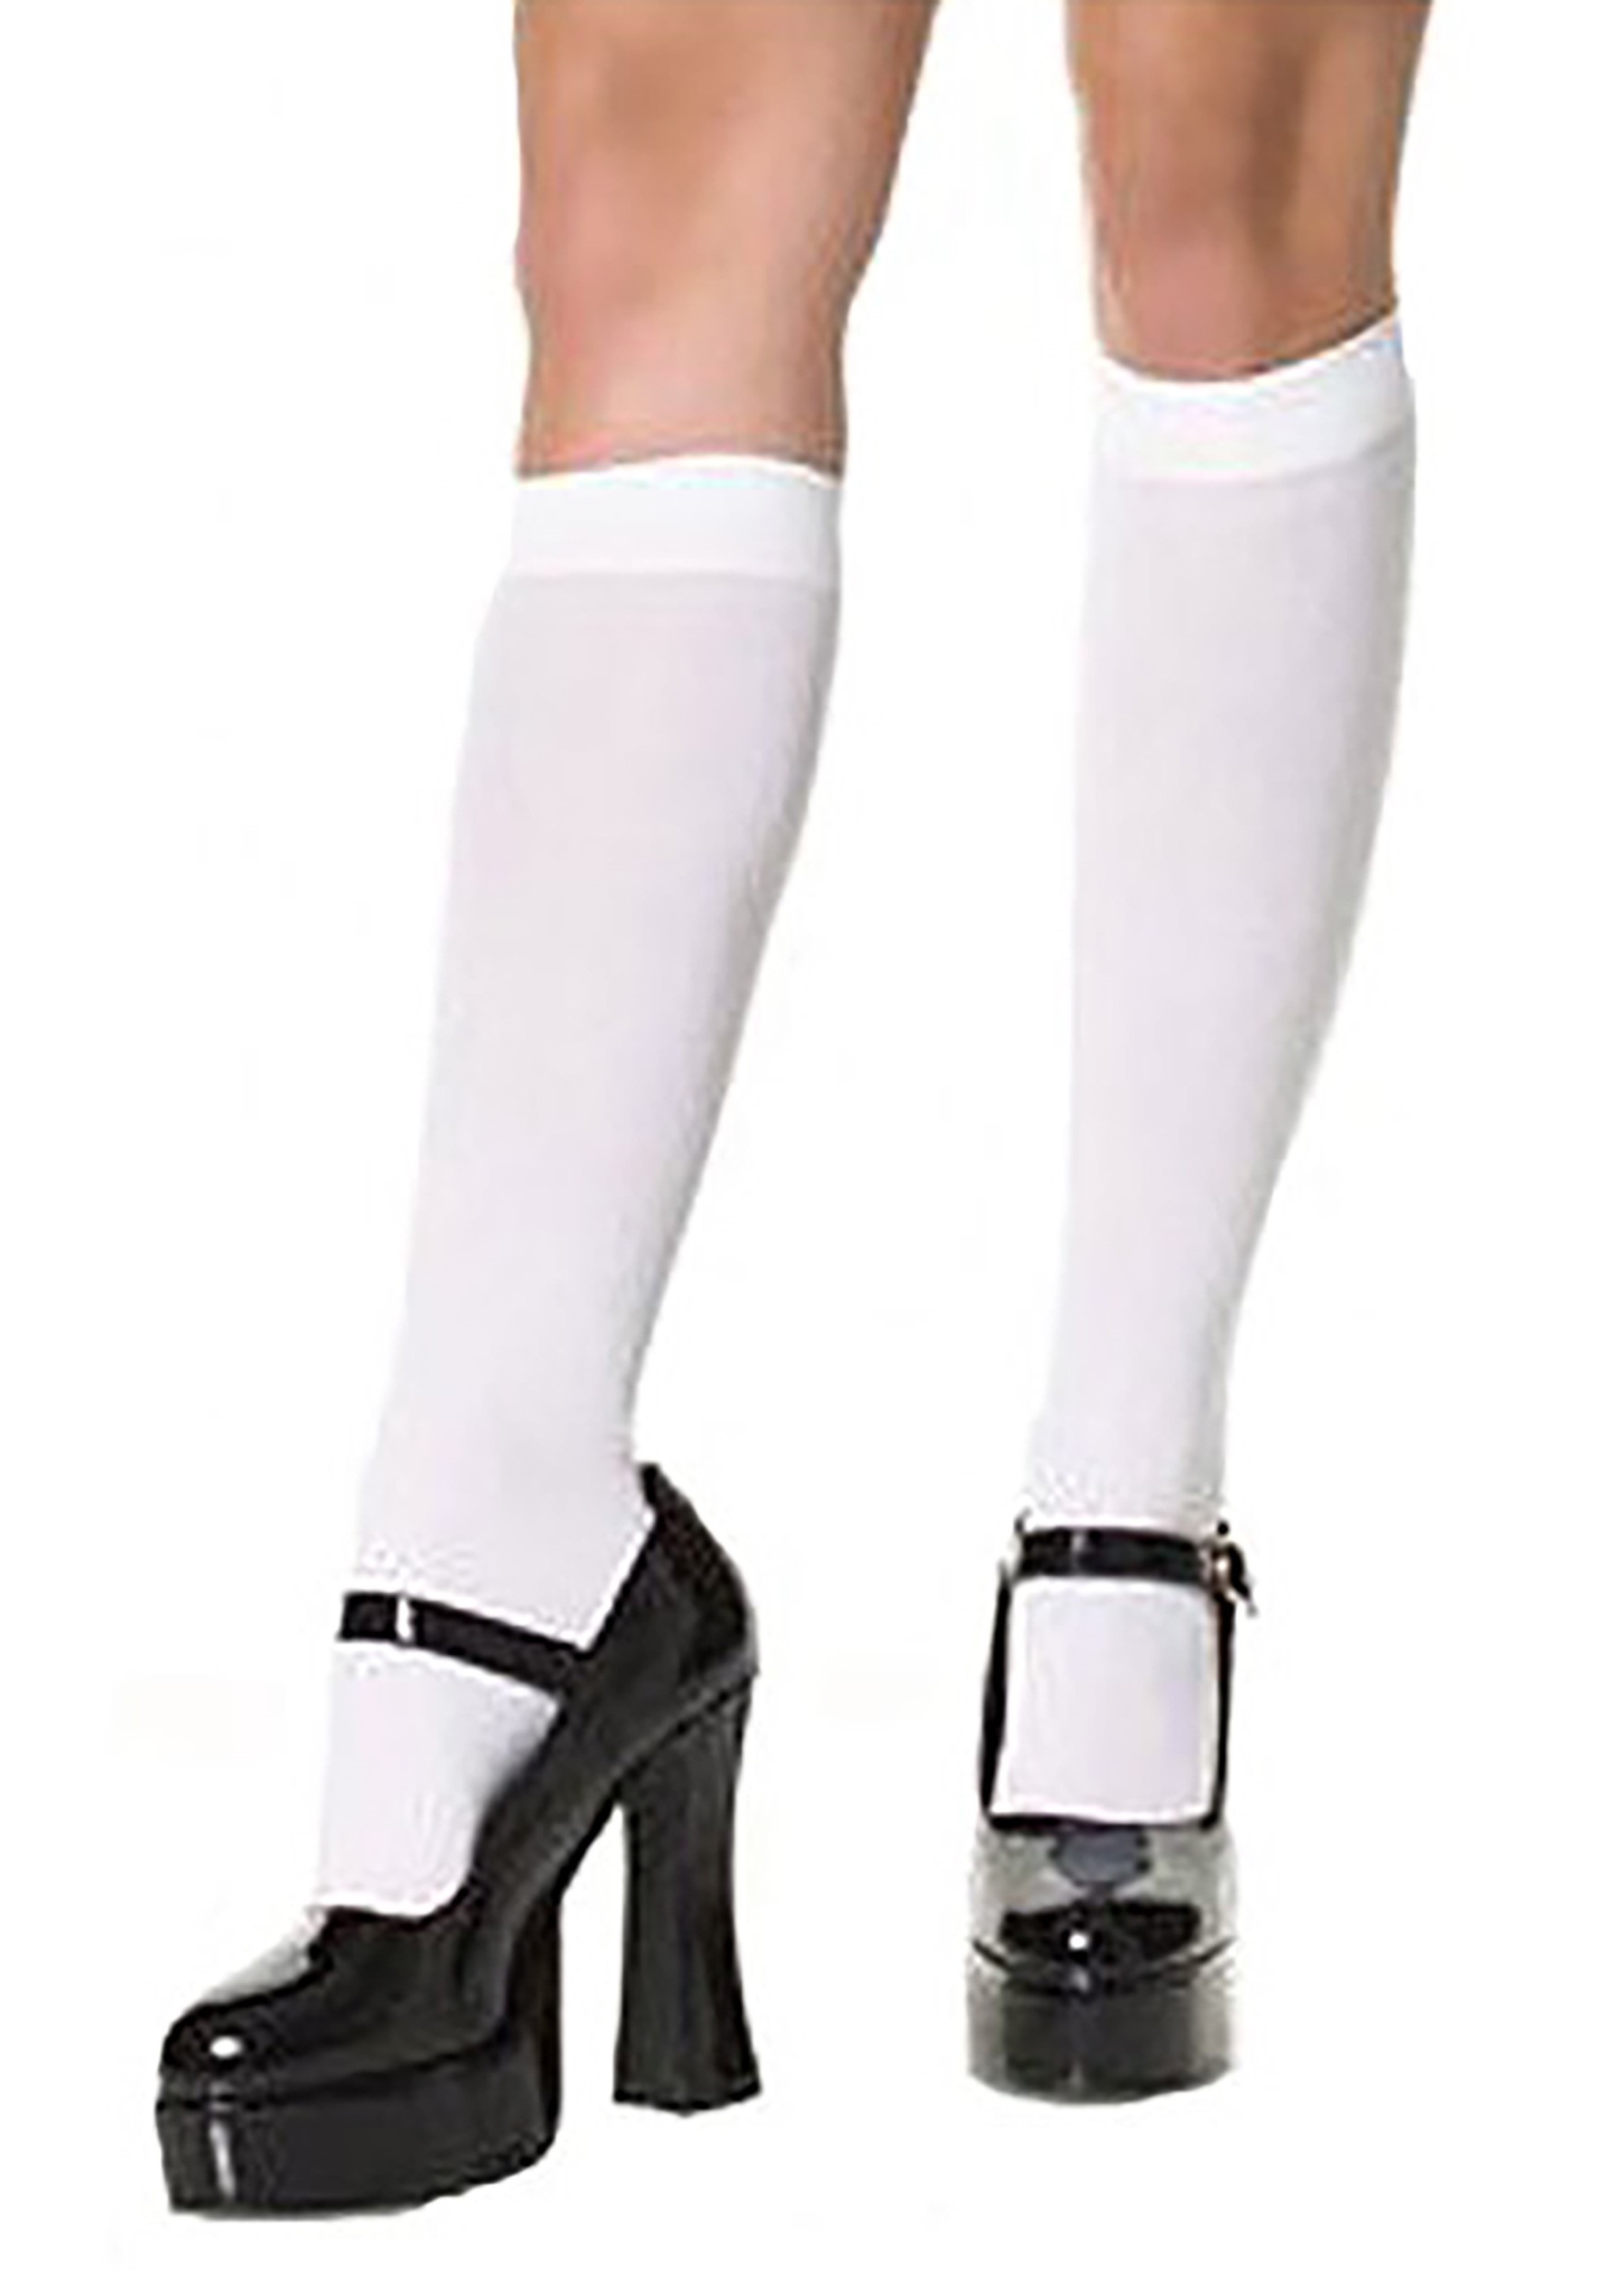 Stockings Knee Tights White Stockings For Women And Girl Gift